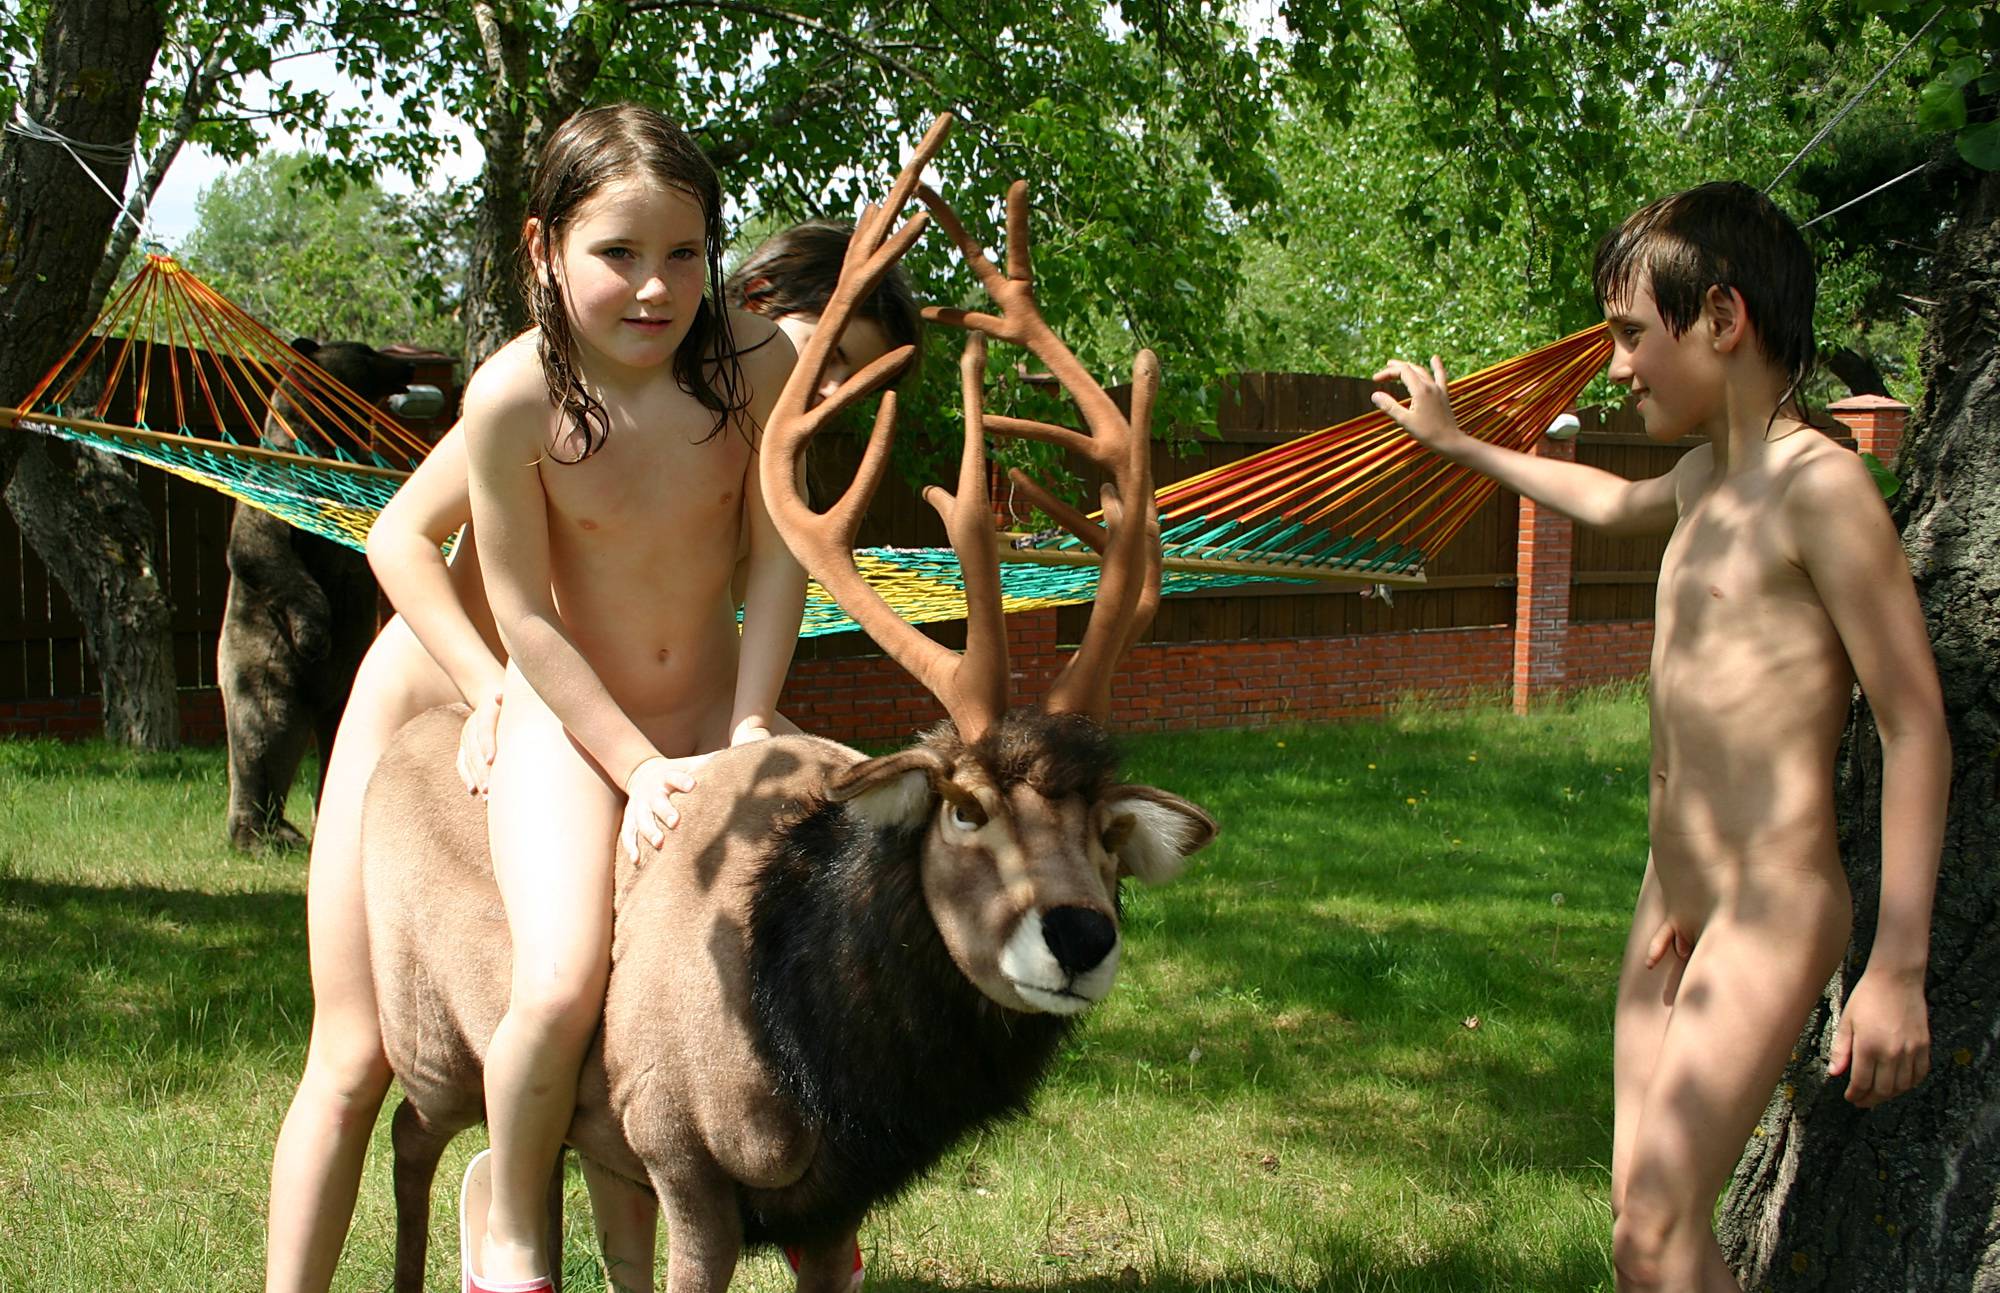 Pure Nudism Photos-Bring Out Outdoor Moose - 4